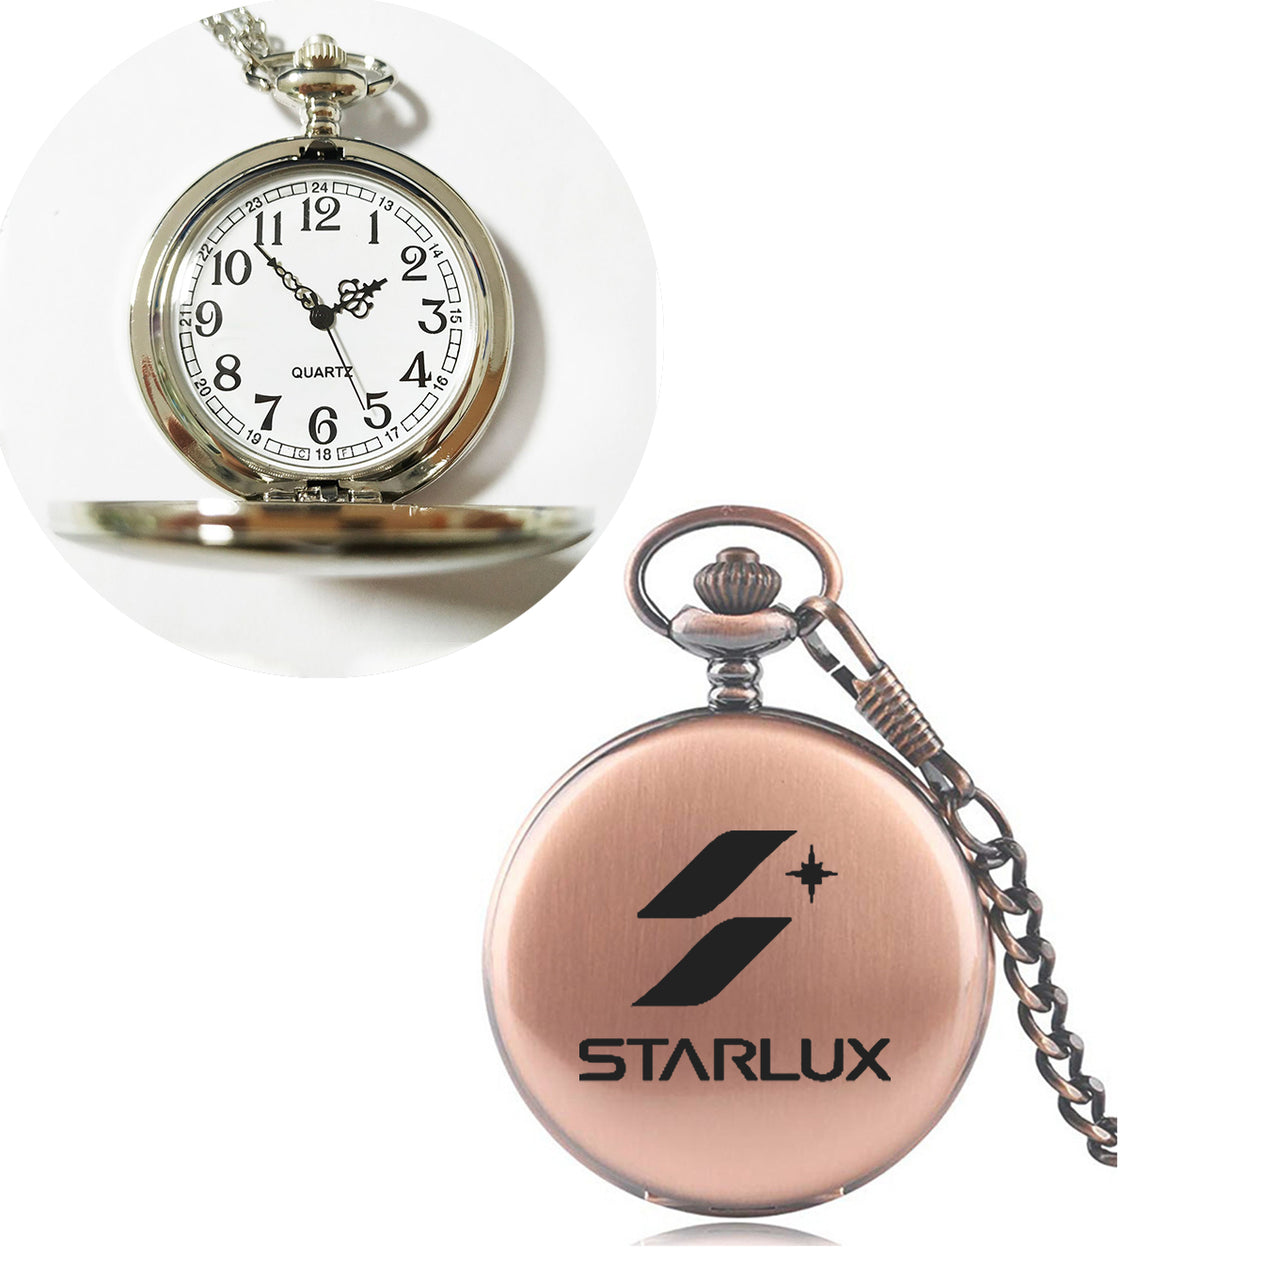 STARLUX Airlines Designed Pocket Watches